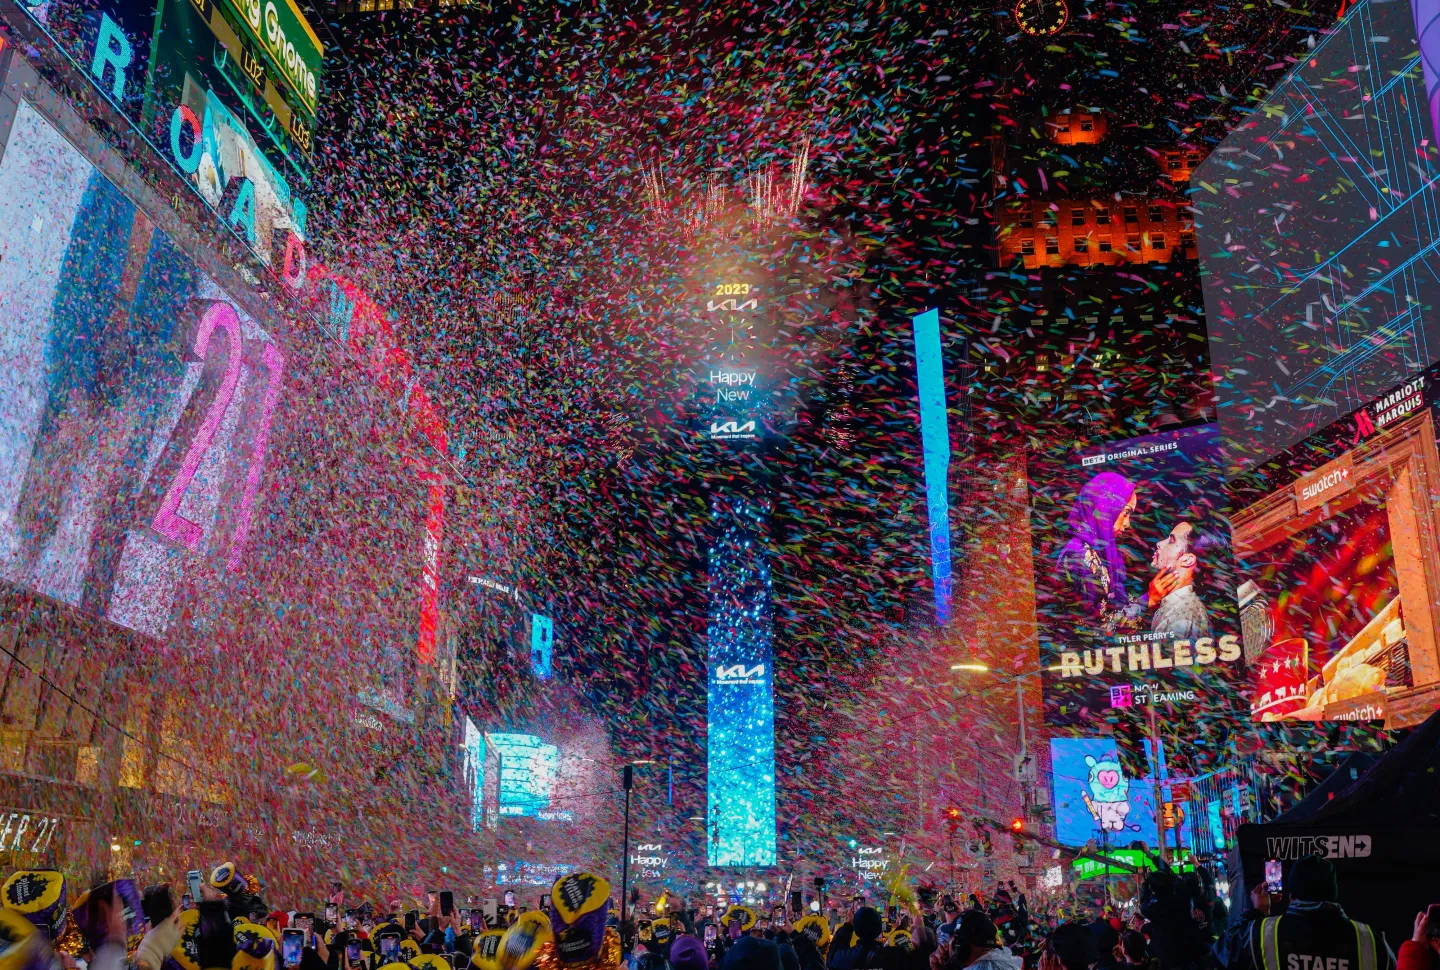 Watch the Times Square Ball Drop for free